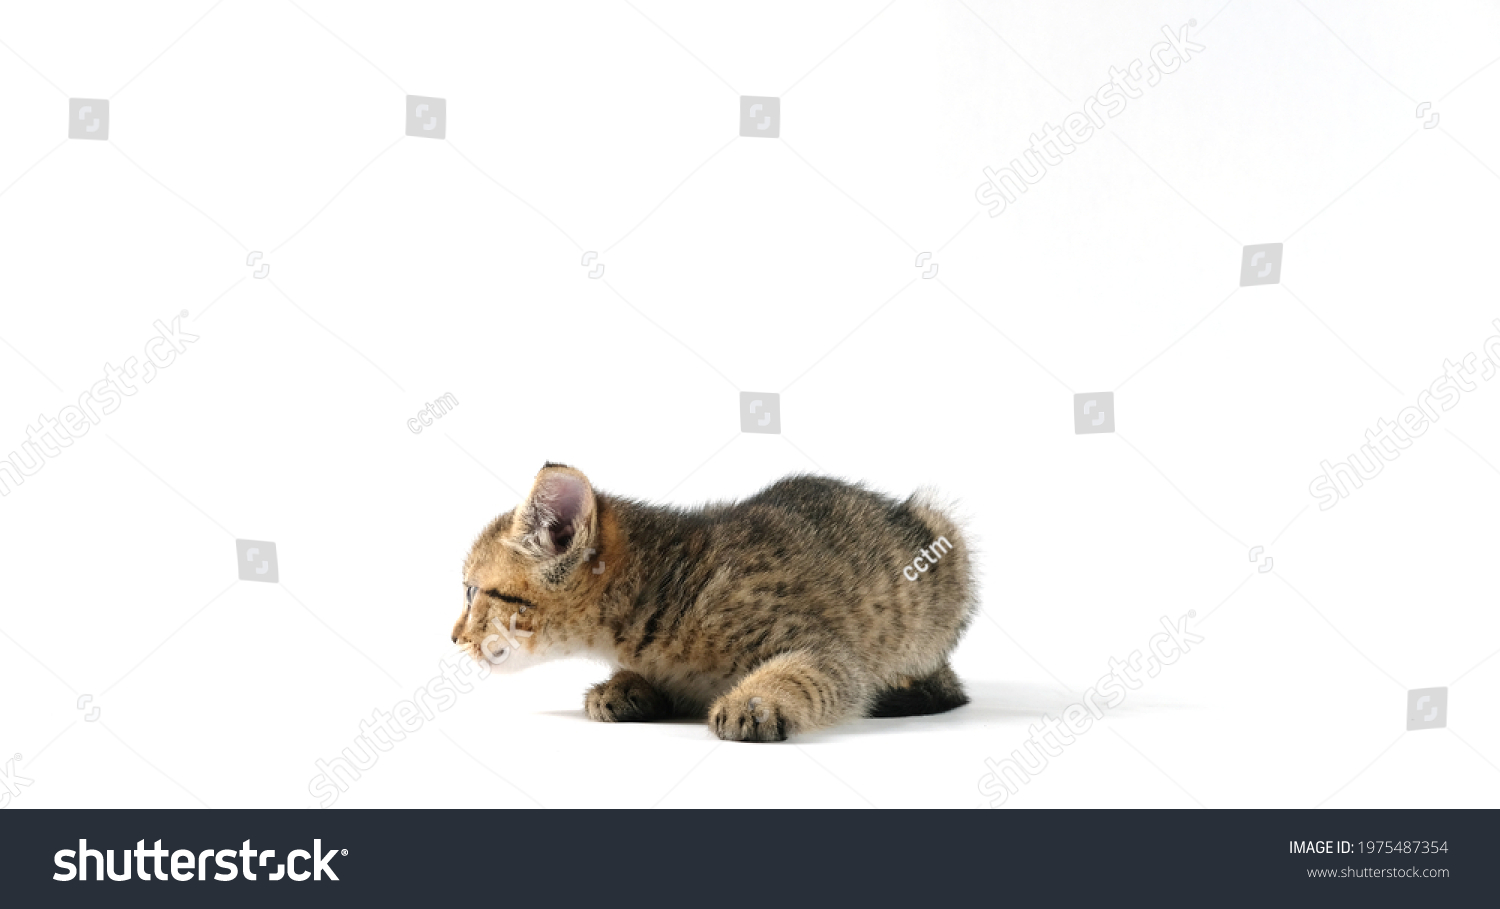 Striped baby cat shows kitten isolated on white background with negative space. #1975487354